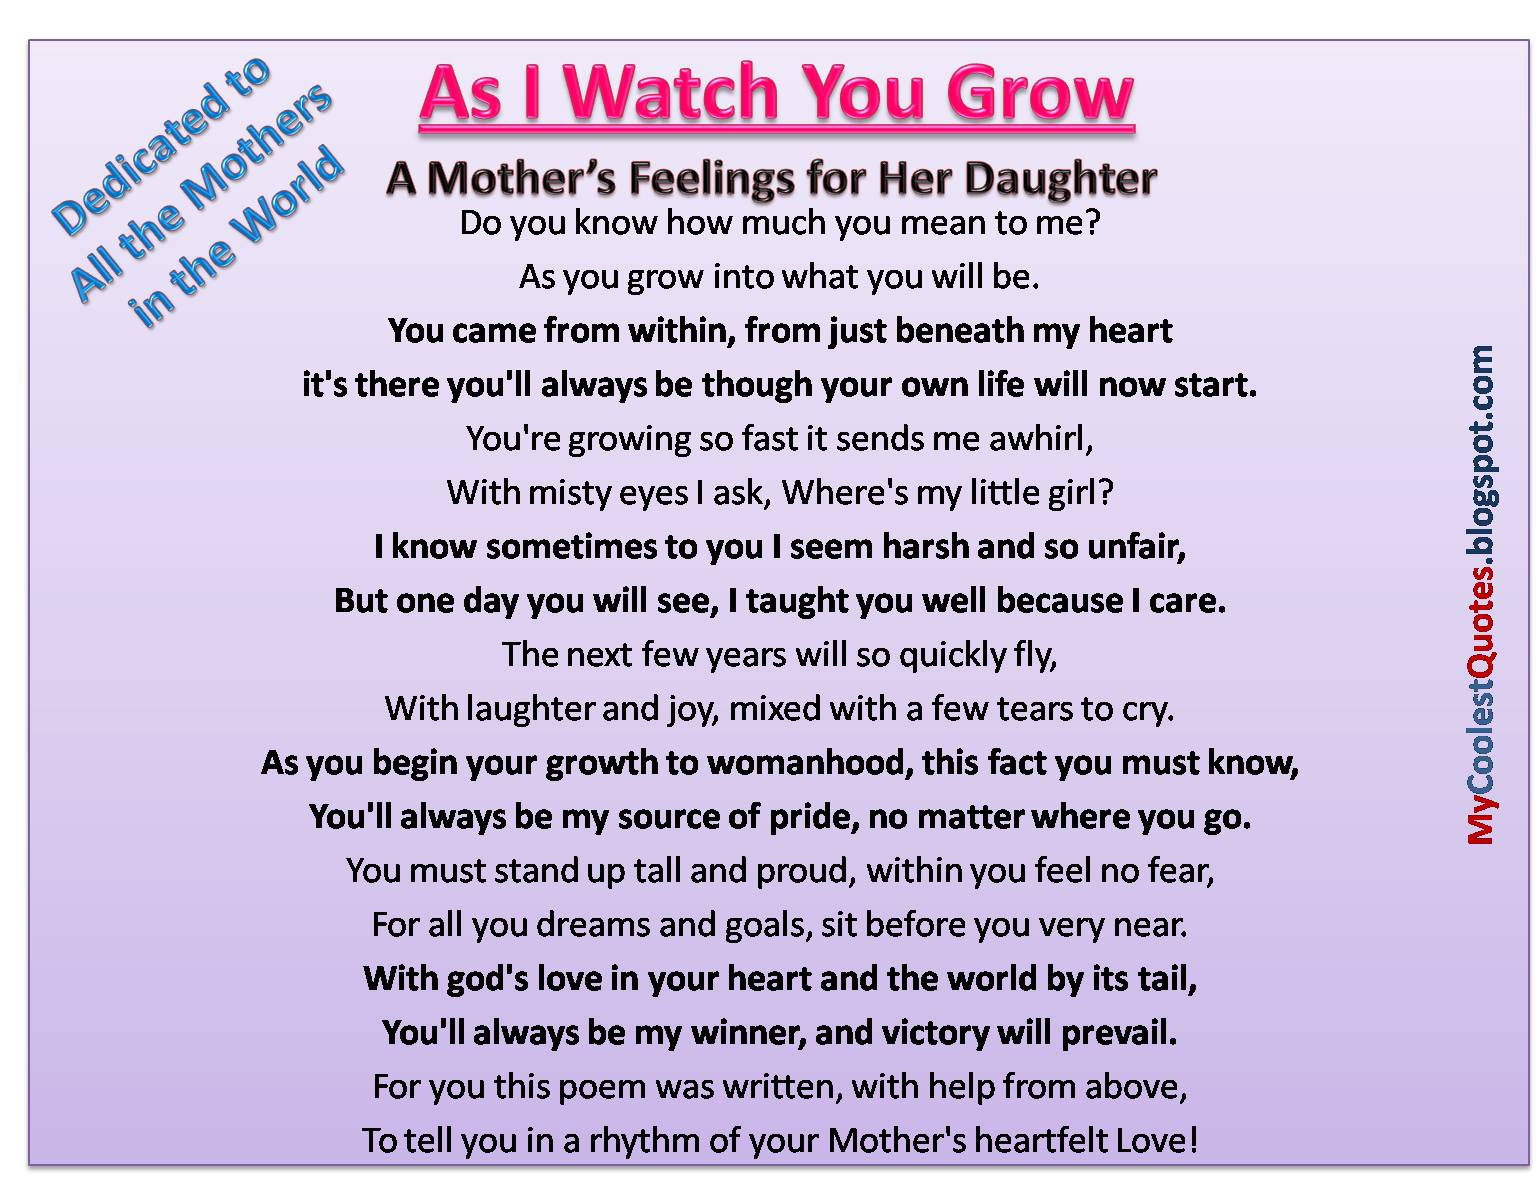 Quotes About Mothers Love For Her Child
 Quotes About A Mothers Love For Her Children